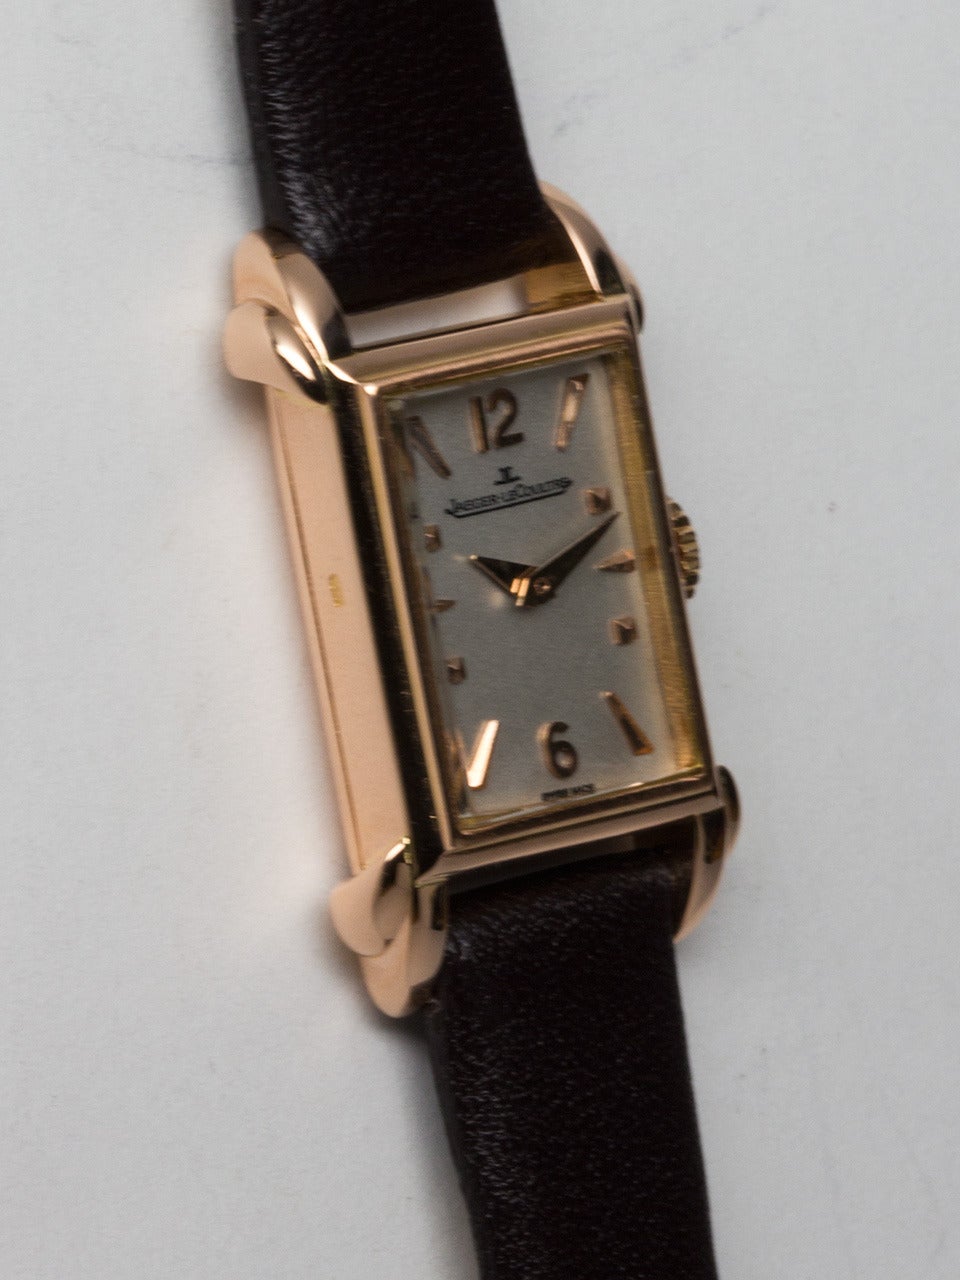 Jaeger LeCoultre 18K Rose Gold Lady's Dress Wristwatch circa 1950s. Rectangular case measuring 15 x 29.5mm with prominent stepped horn lugs. Featuring beautifully restored matte silvered dial with applied pink triangular indexes and tapered sword